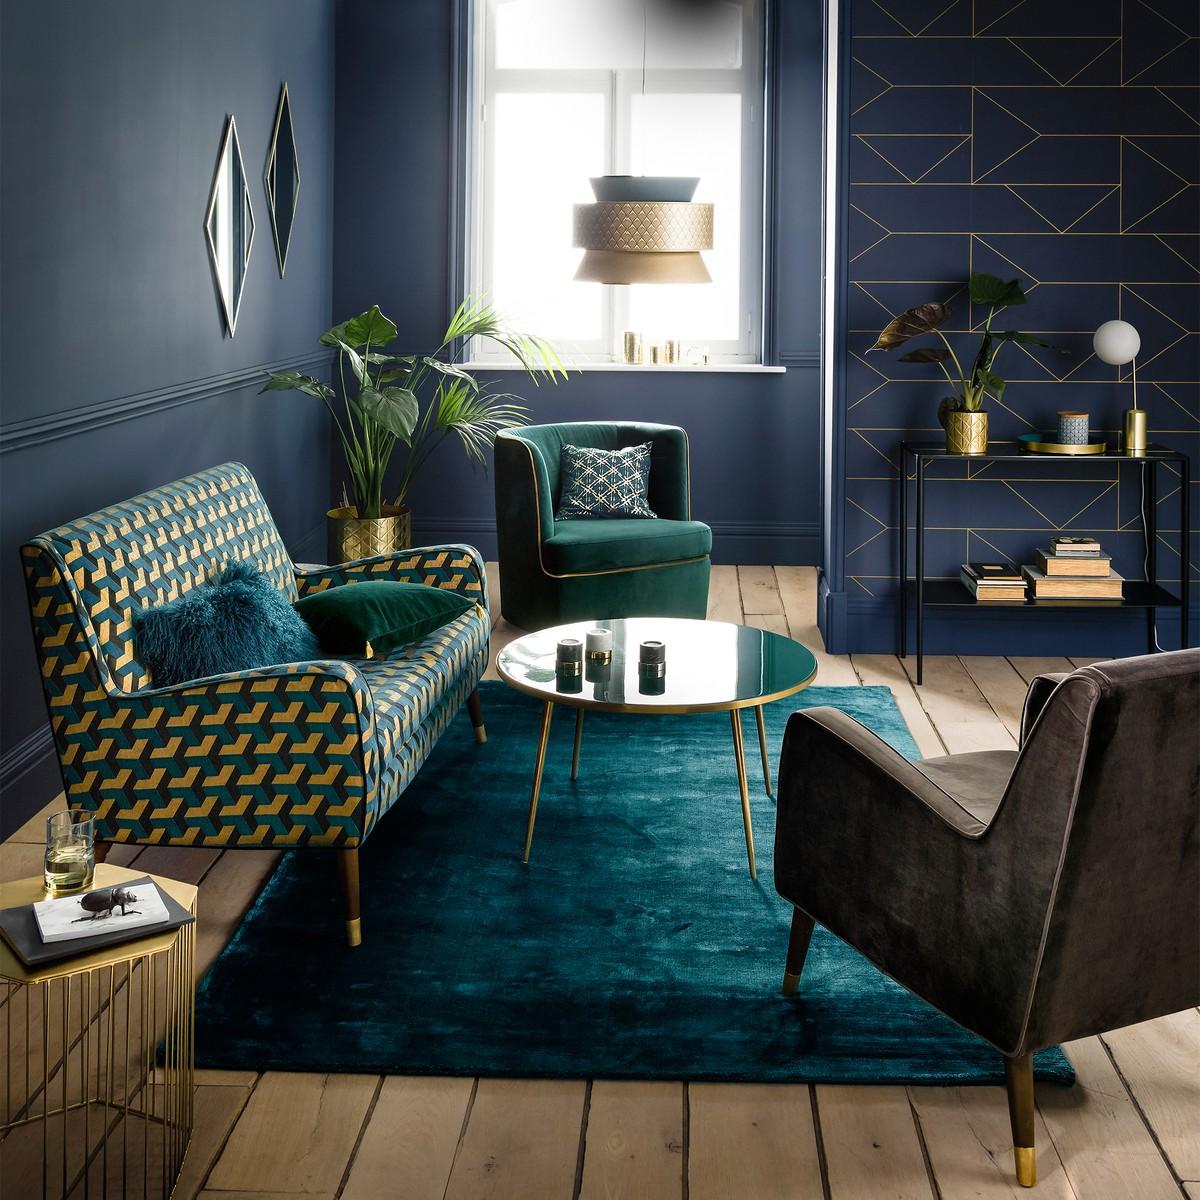 Green, Navy and gold living room inspiration| Today we're talking inspiration for adding green to your living room. Green is a really versatile colour to decorate your home with. But, which colours and tones work well? What kind of accessories work with green? This post gives you ideas for pulling together an elegant green colour palette and pieces for your home. Read more: kittyandb.com #greenlivingroom #interiordecoratinginspiration #colorpalette #colourpalette #greenaesthetic #navyandgreen